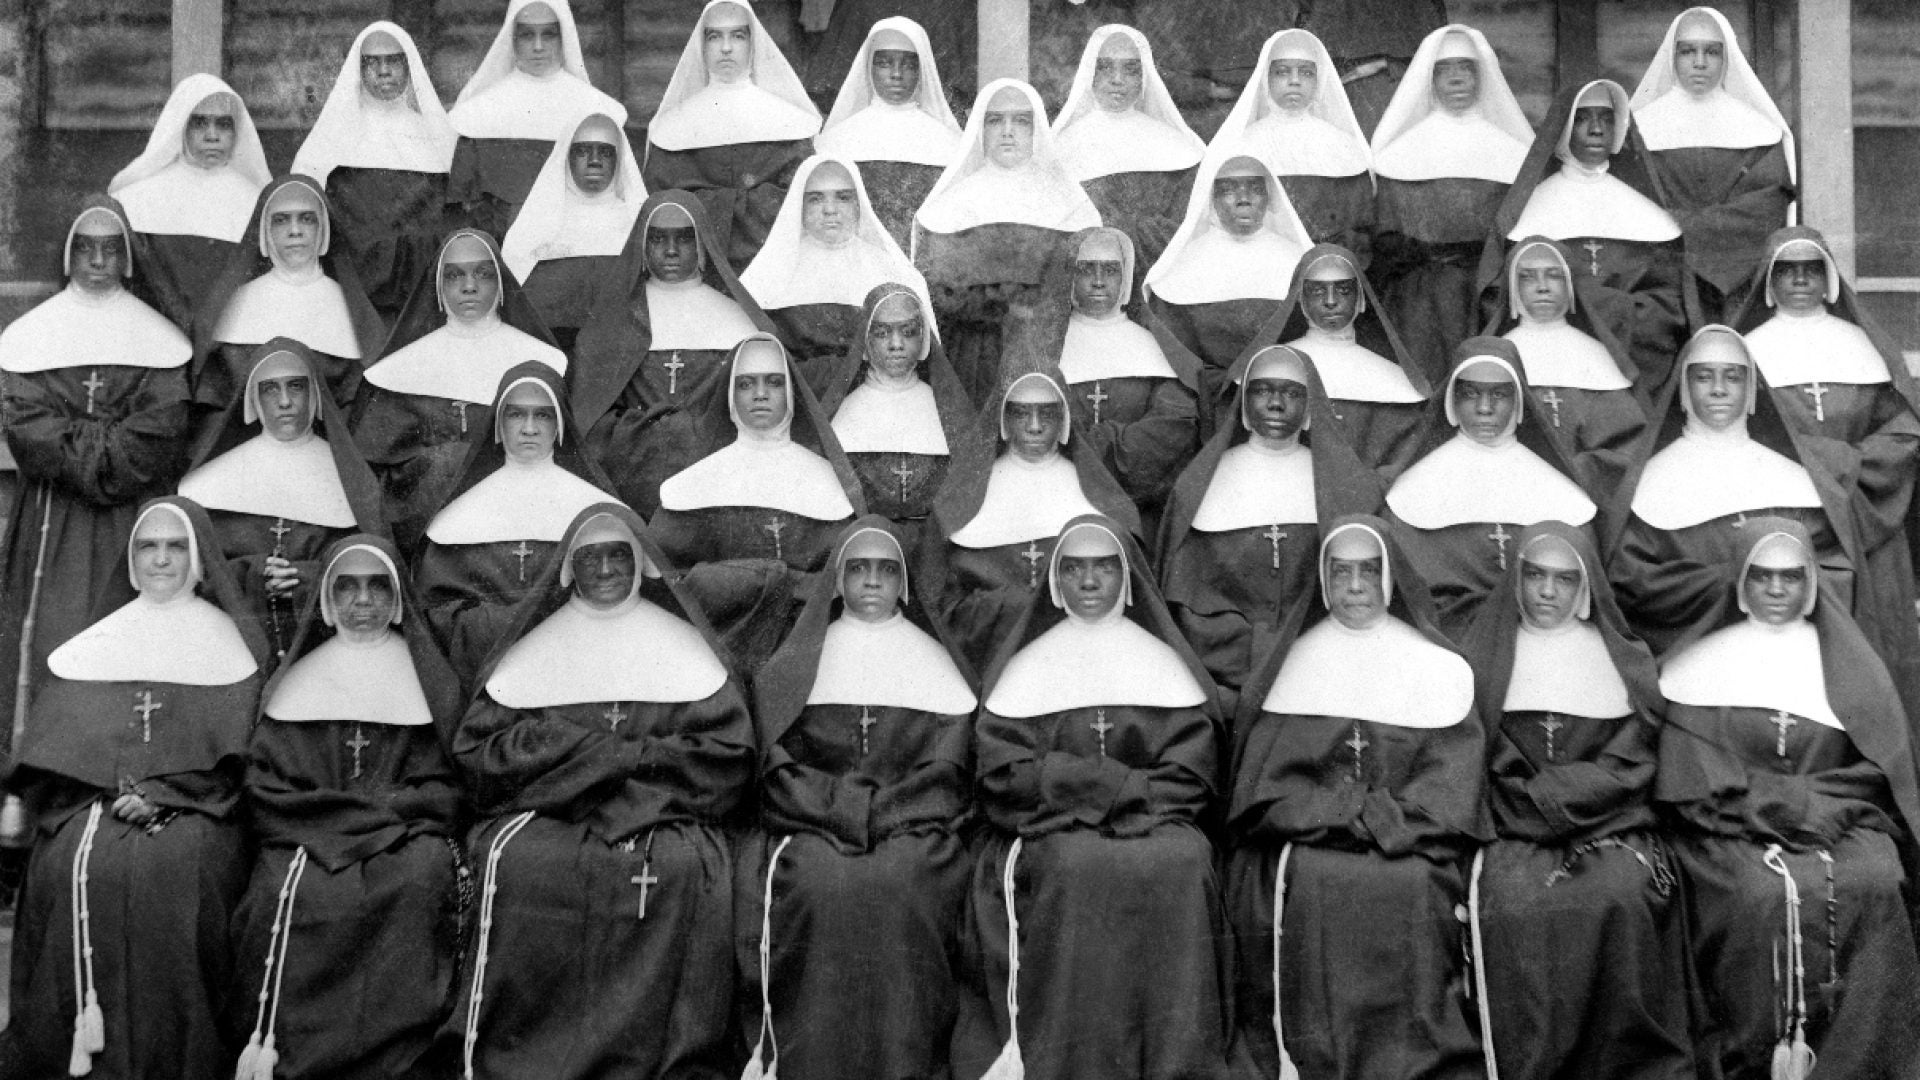 Forgotten Prophets & Feminist Icons: Why We All Need To Know The Story of Black Nuns